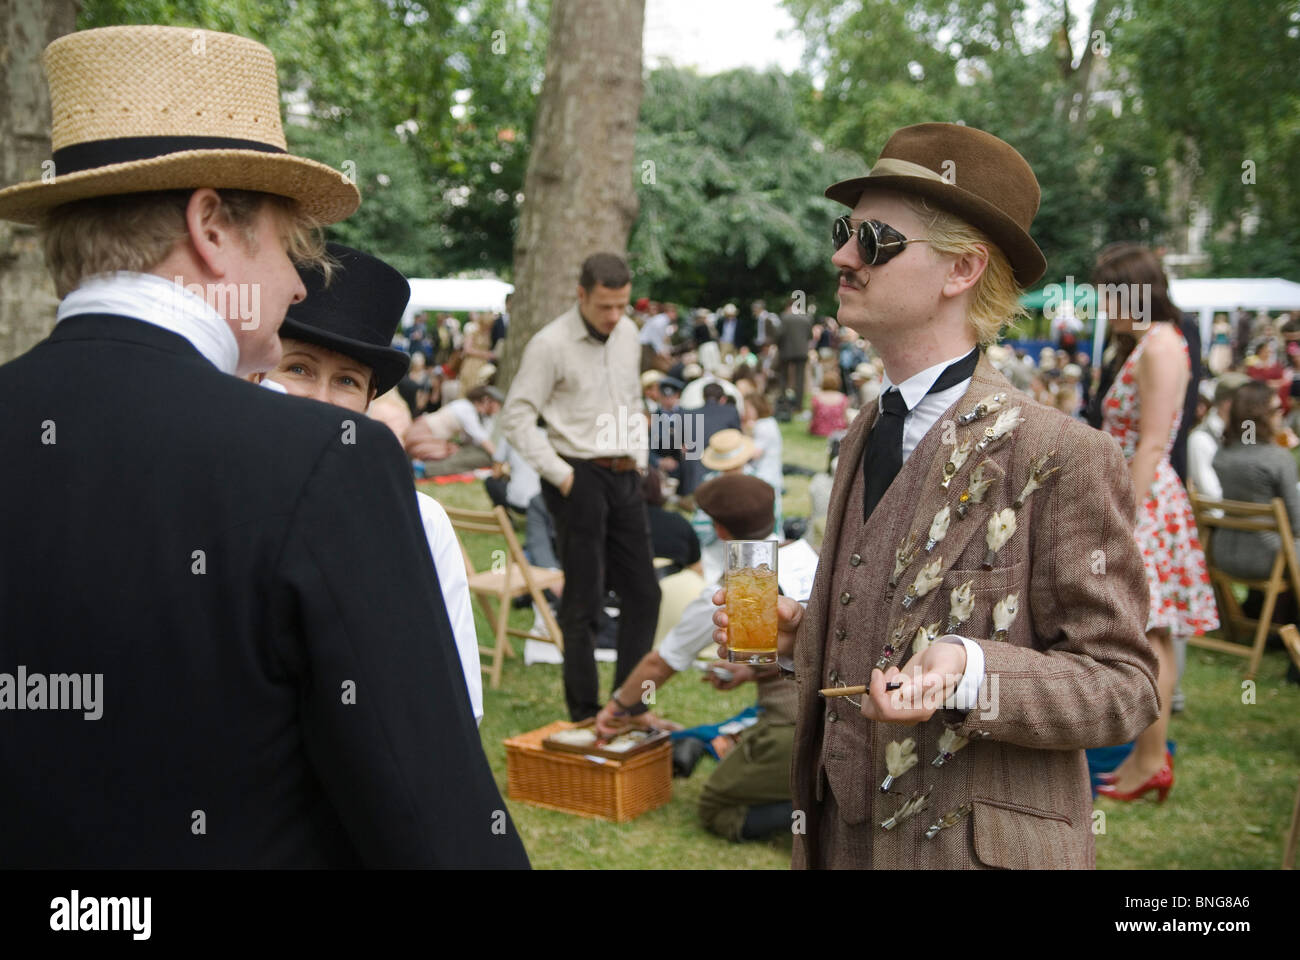 The Chap Olympiad Bedford Square London UK.  HOMER SYKES Stock Photo